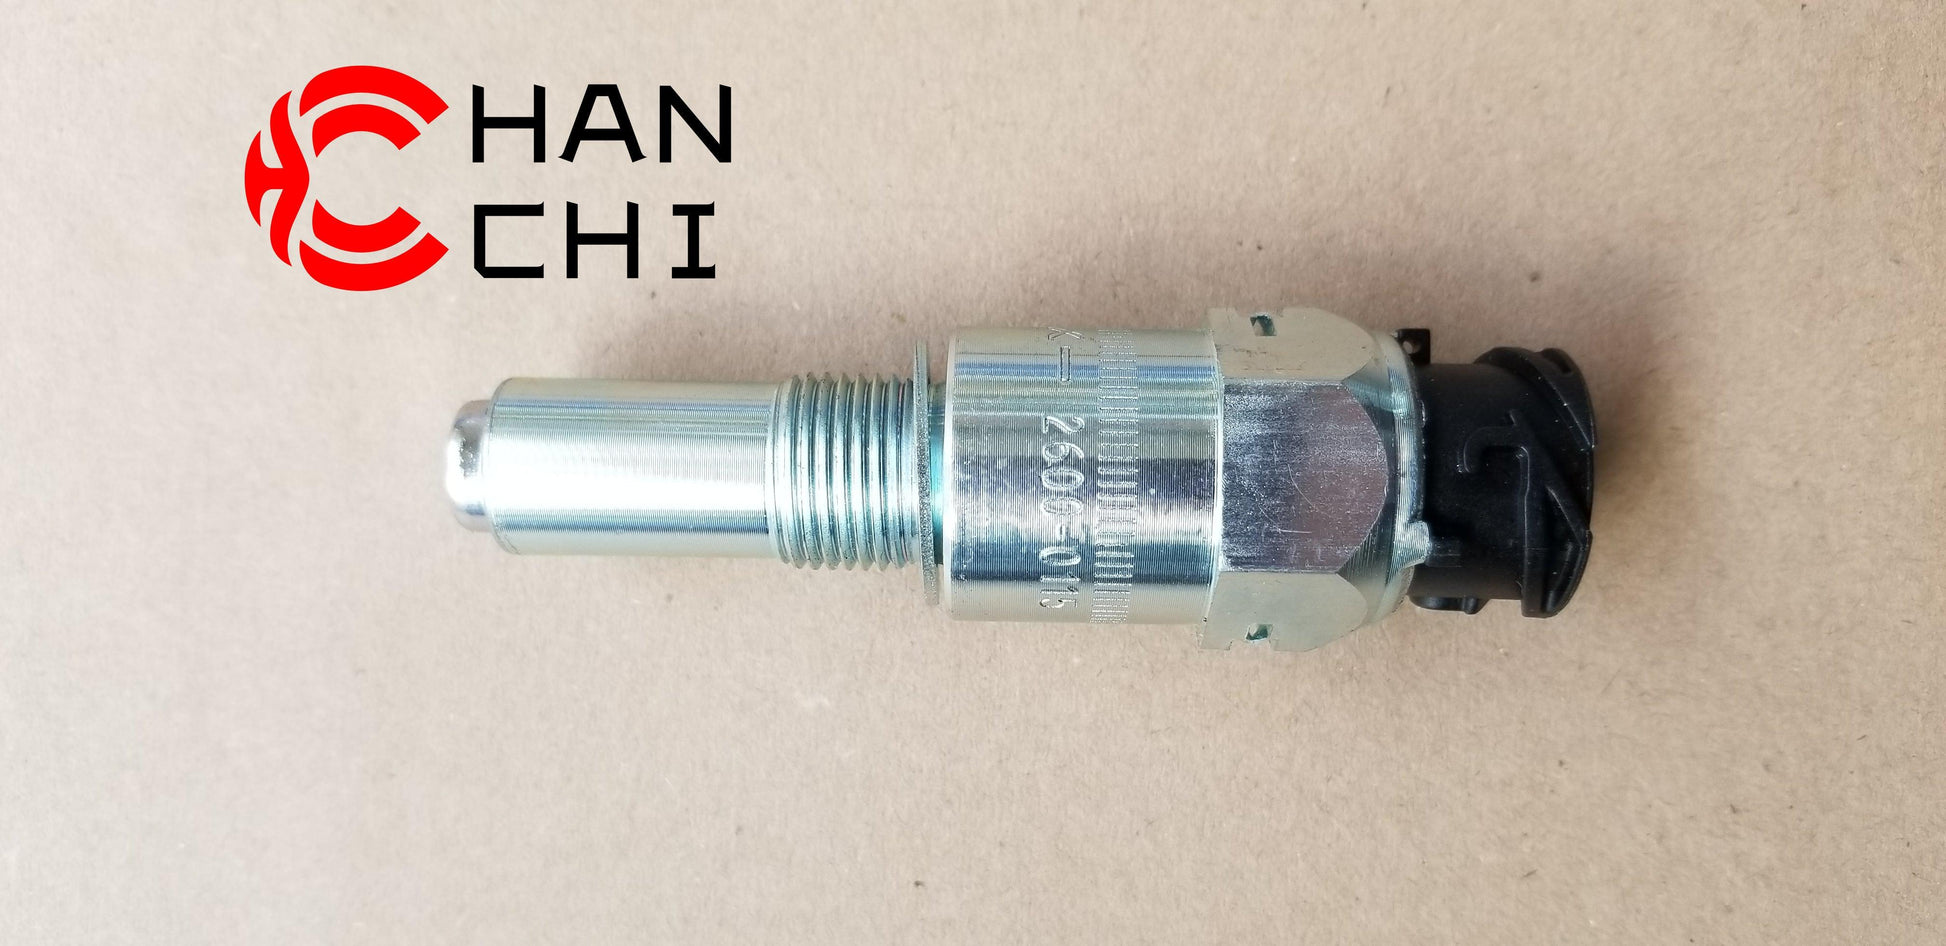 【Description】---☀Welcome to HANCHI☀---✔Good Quality✔Generally Applicability✔Competitive PriceEnjoy your shopping time↖（^ω^）↗【Features】Brand-New with High Quality for the Aftermarket.Totally mathced your need.**Stable Quality**High Precision**Easy Installation**【Specification】OEM: 2600-0115 Speed Meter Sensor NEW NENRGYMaterial: metalColor: GOLDENOrigin: Made in ChinaWeight: 100g【Packing List】1* Speed Sensor 【More Service】 We can provide OEM service We can Be your one-step solution for Auto Parts